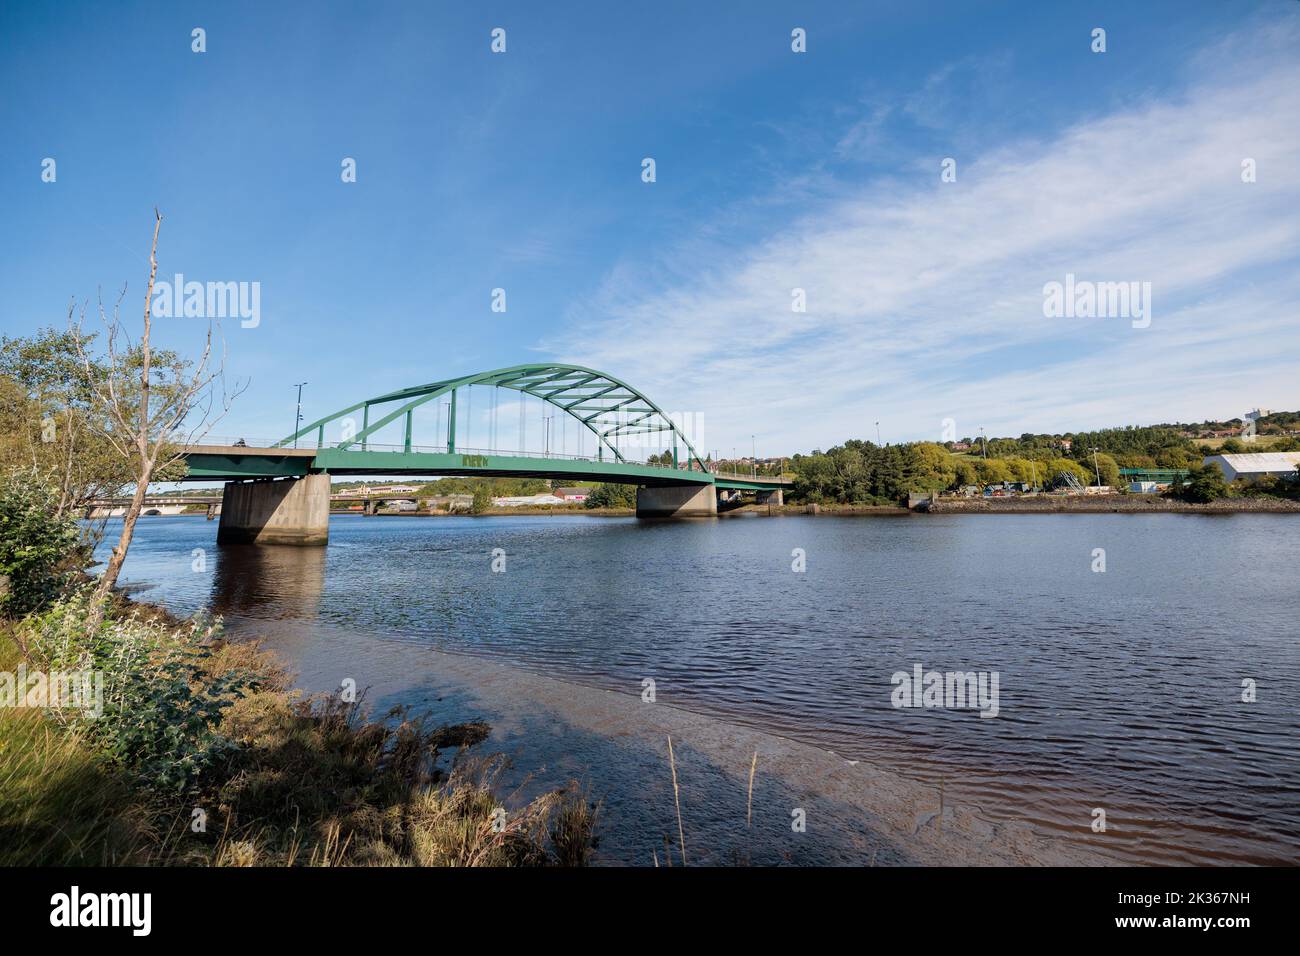 Blaydon England: 17th Sept 2022: View of Newcastle upon Tyne's Scotswood Bridge from the Tyne River in Blaydon. Sunny day with blue sky and light clou Stock Photo